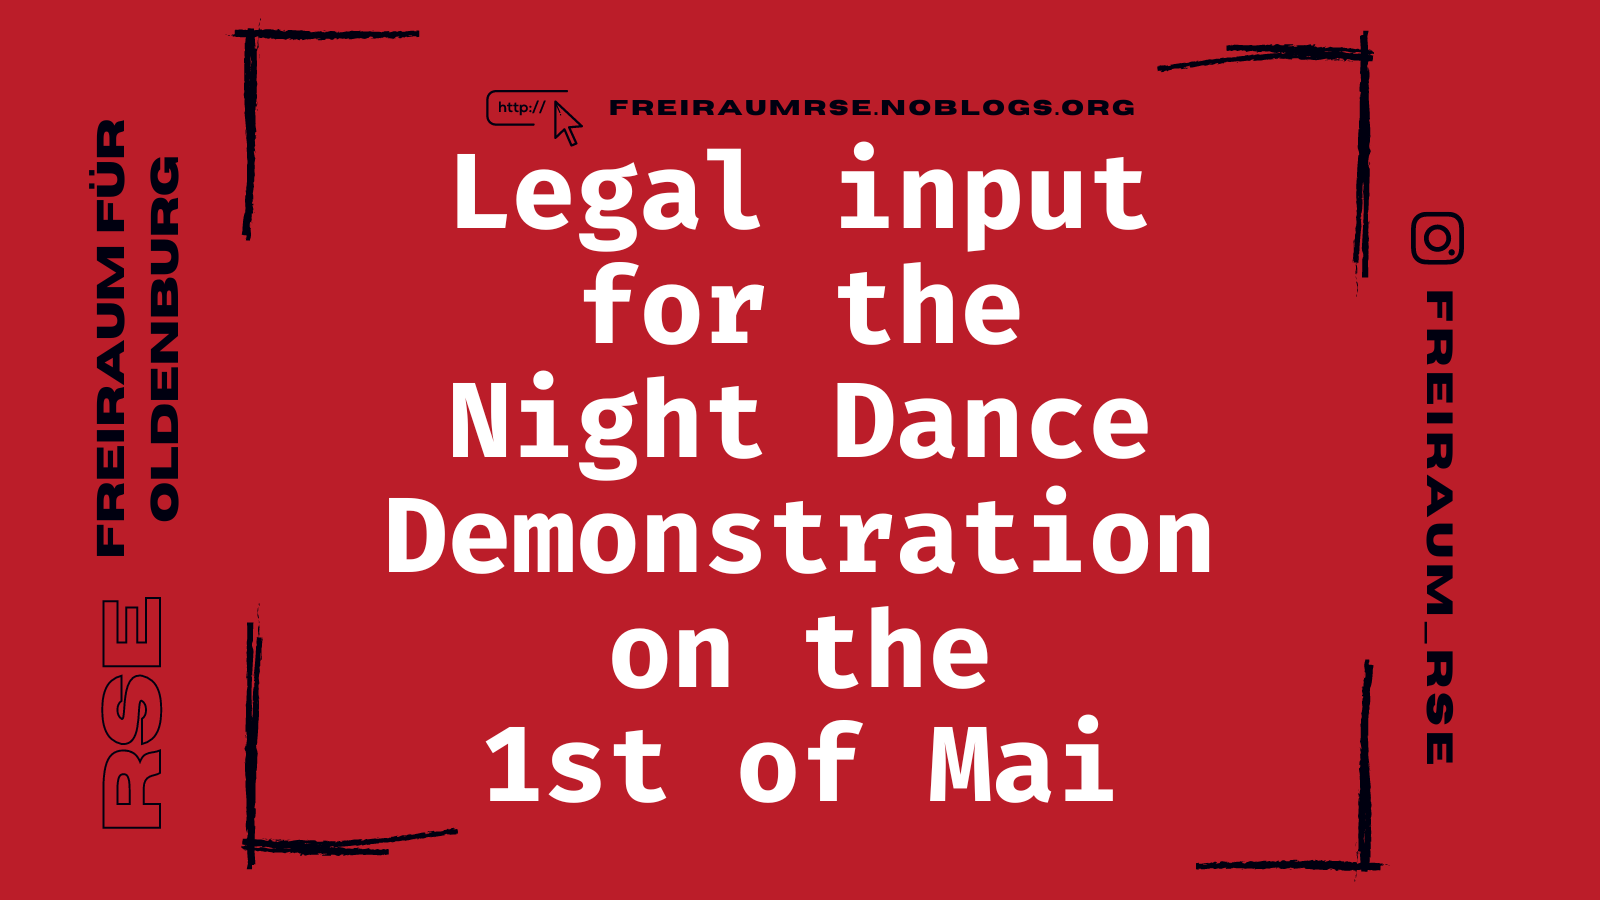 Legal input for the Night Dance Demonstration on the 1st of May